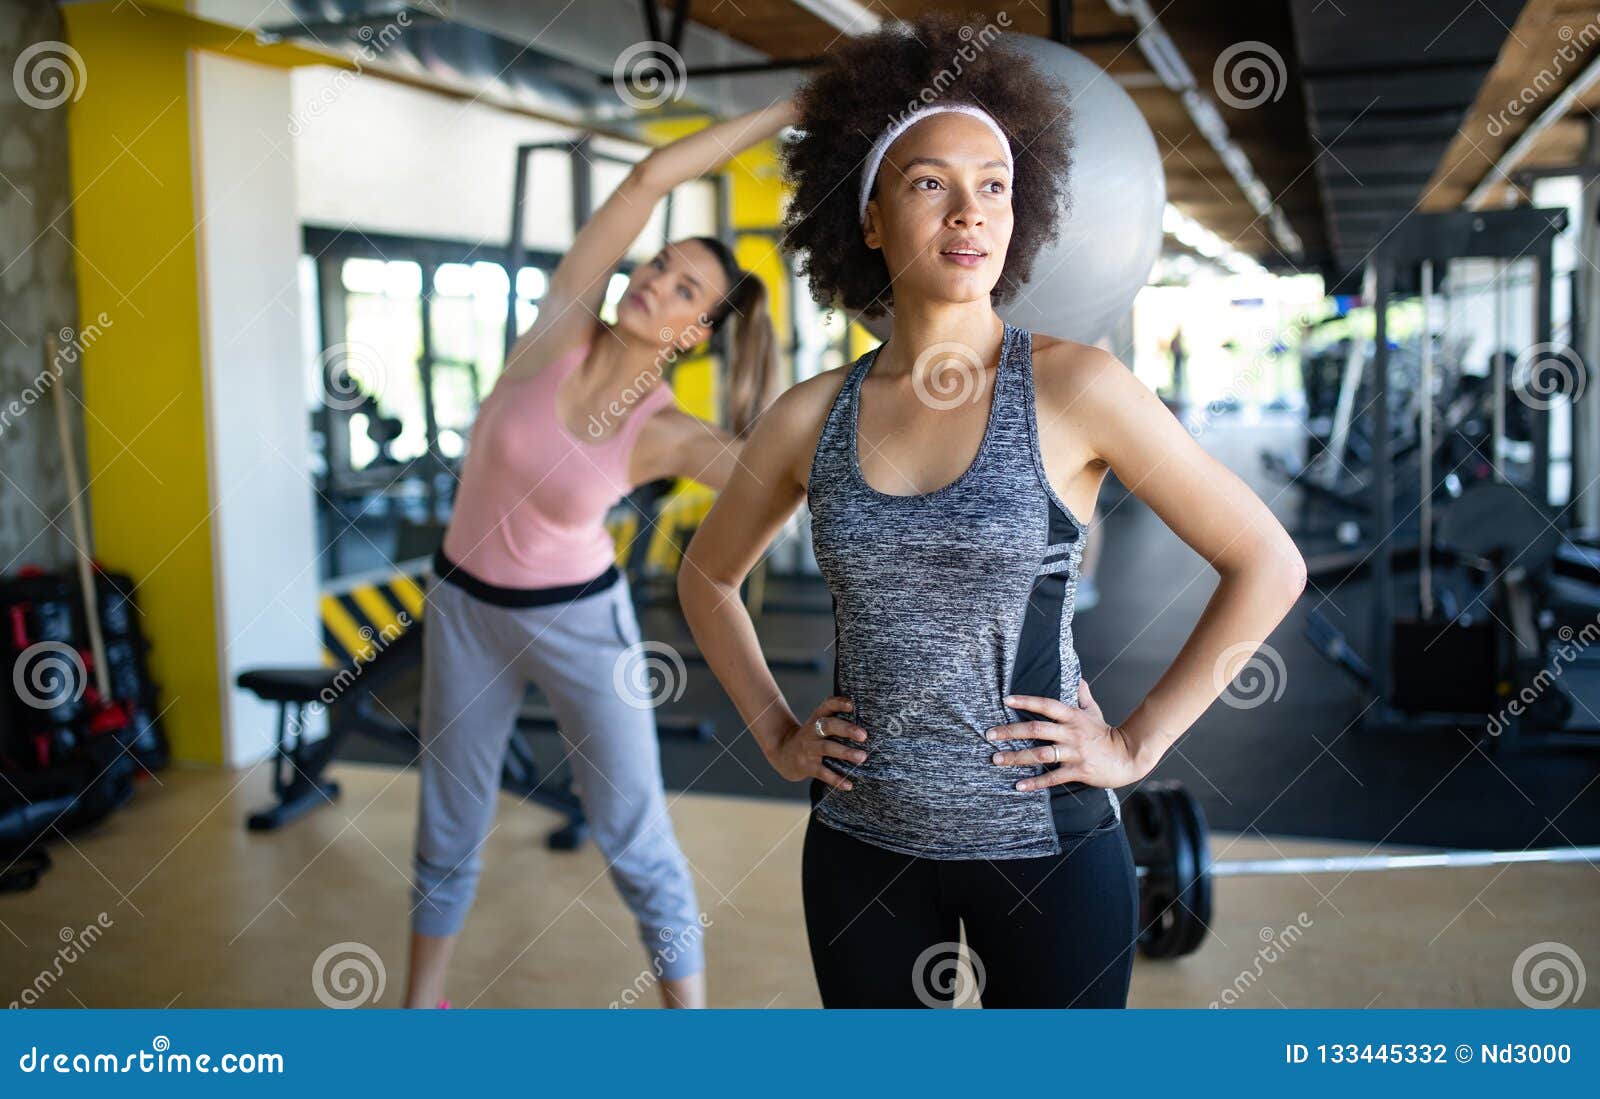 239,052 Beautiful Gym Girl Stock Photos - Free & Royalty-Free Stock Photos  from Dreamstime